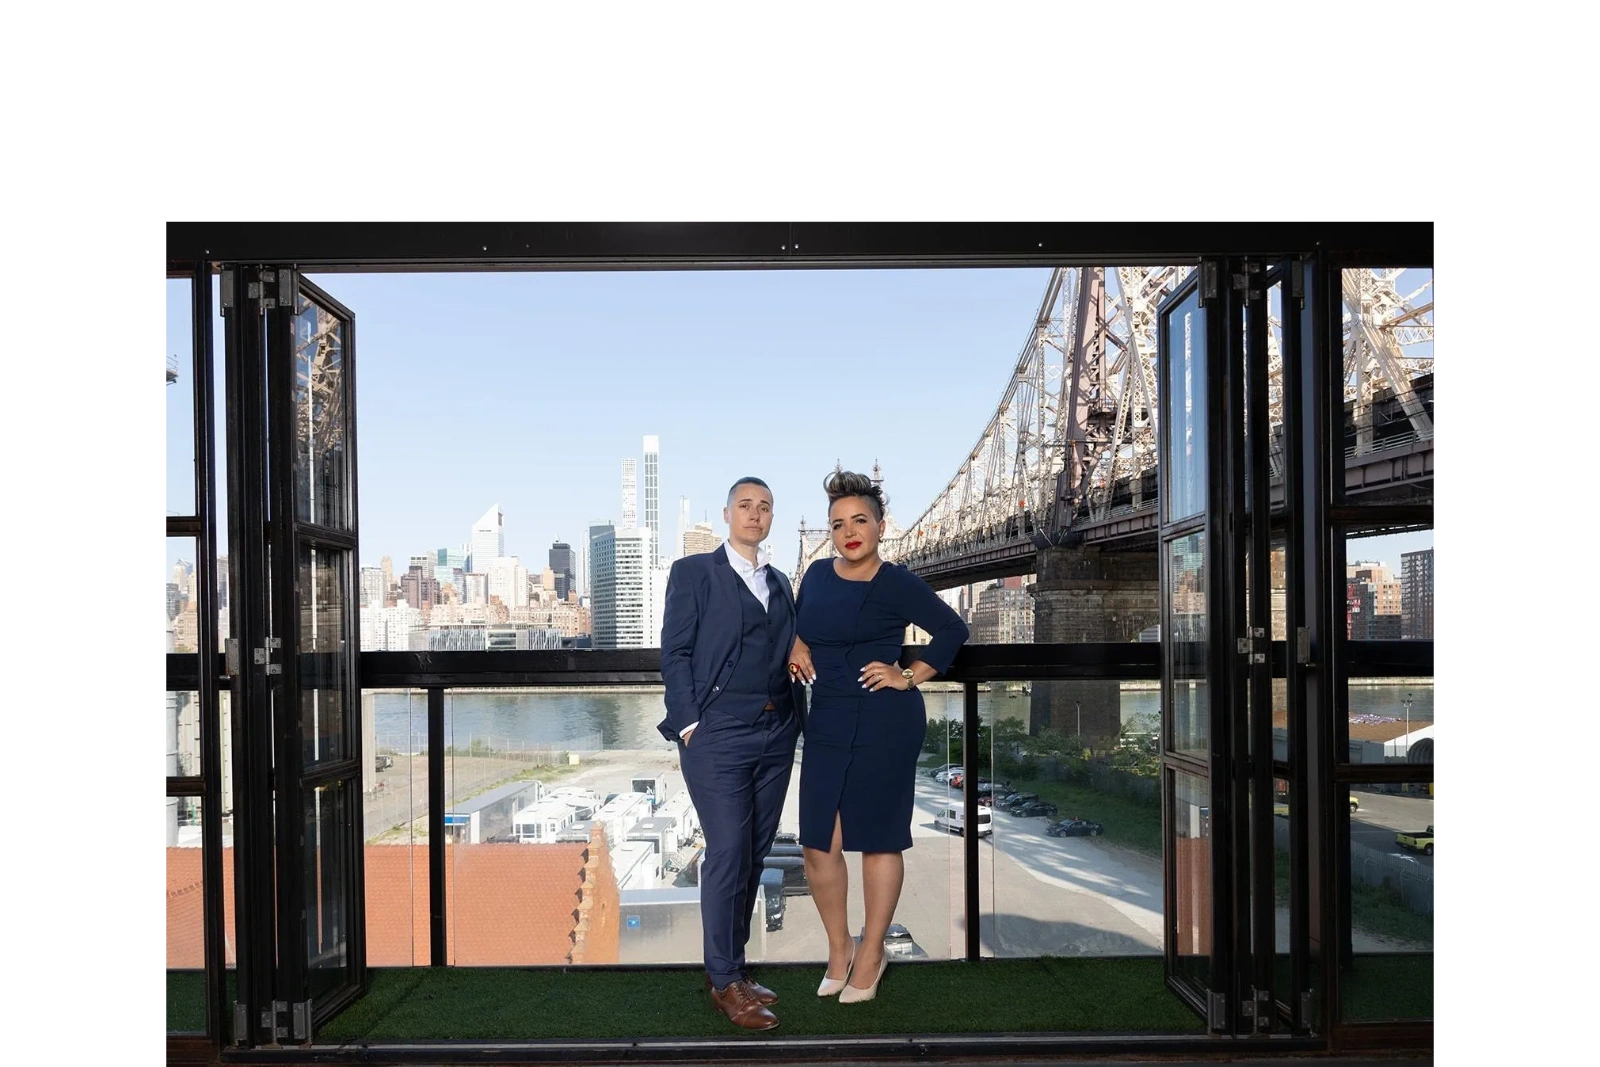 Jet-setting NY real estate duo - Turning dreams into addresses